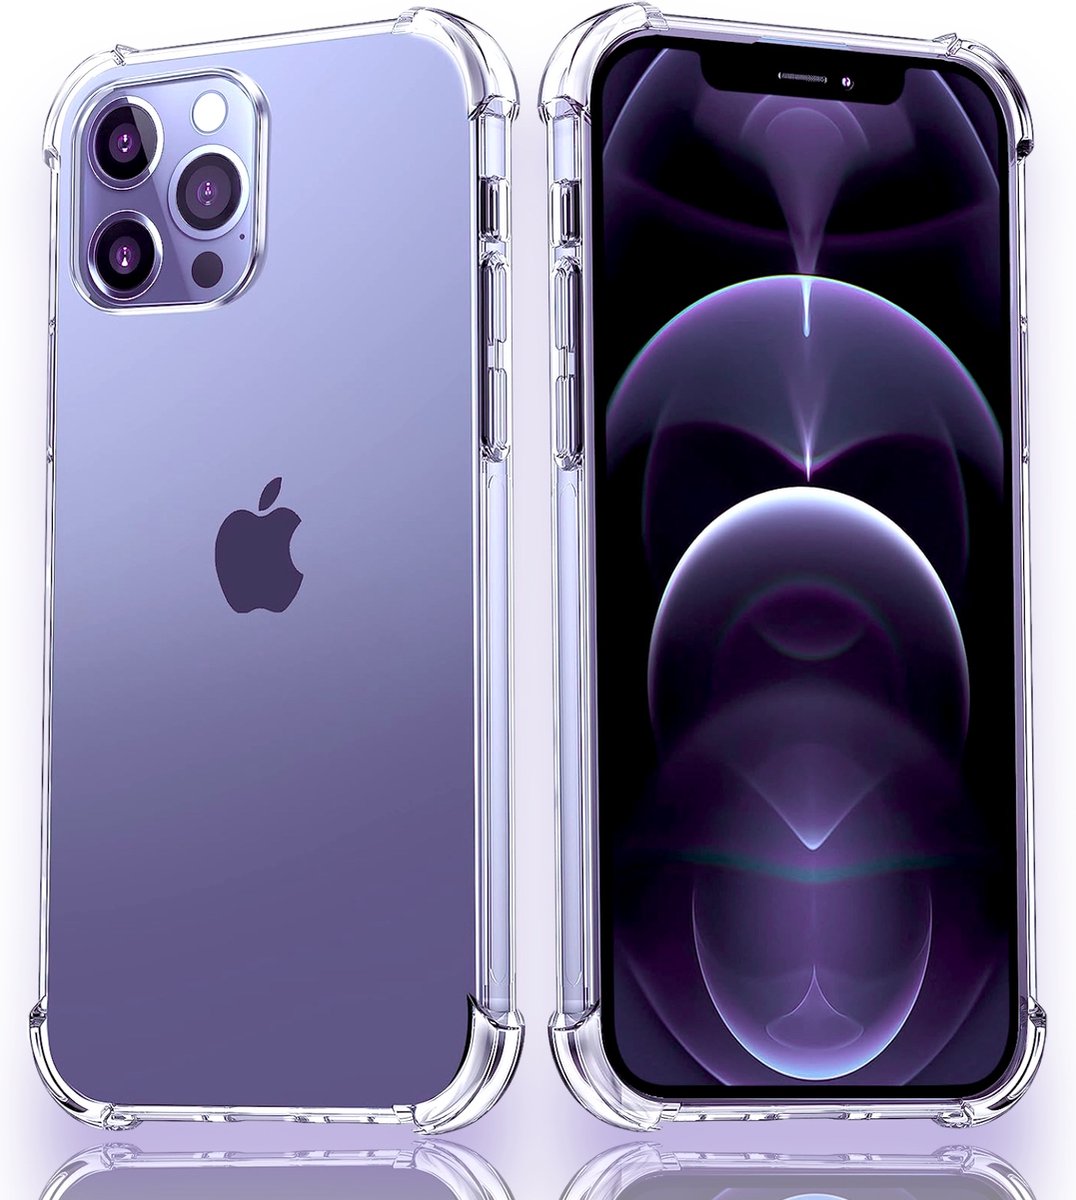 iPhone 12 Pro Max Shockproof Hoesje - Ultieme Bescherming iPhone 12 Pro Max Case - Luxe Transparante iPhone 12 Pro Max Backcover